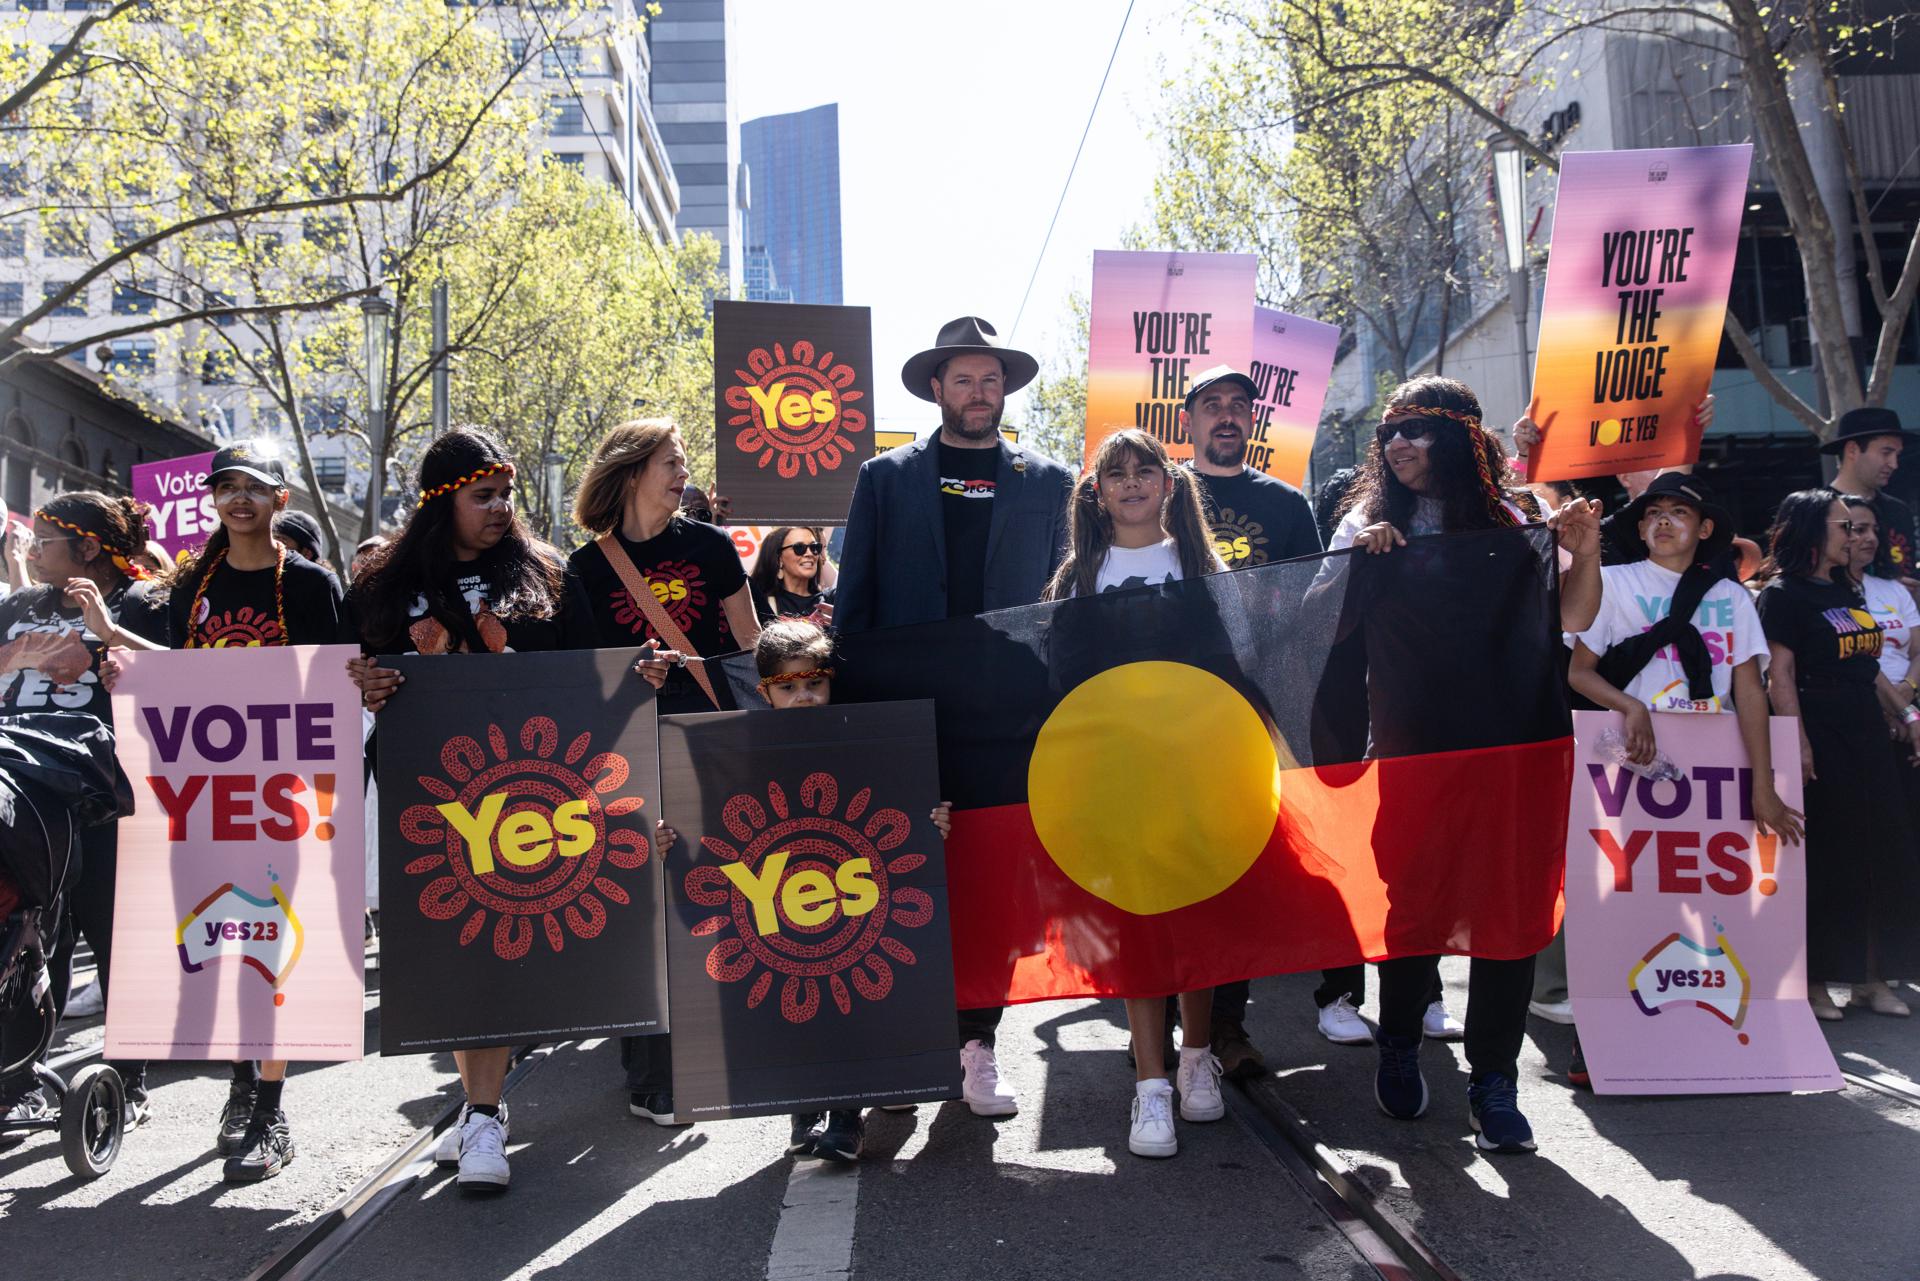 Supporters of the 'yes' campaign are seen during a walk for the Yes vote event in Melbourne, Australia, 17 September 2023. EFE/EPA/DIEGO FEDELE AUSTRALIA AND NEW ZEALAND OUT